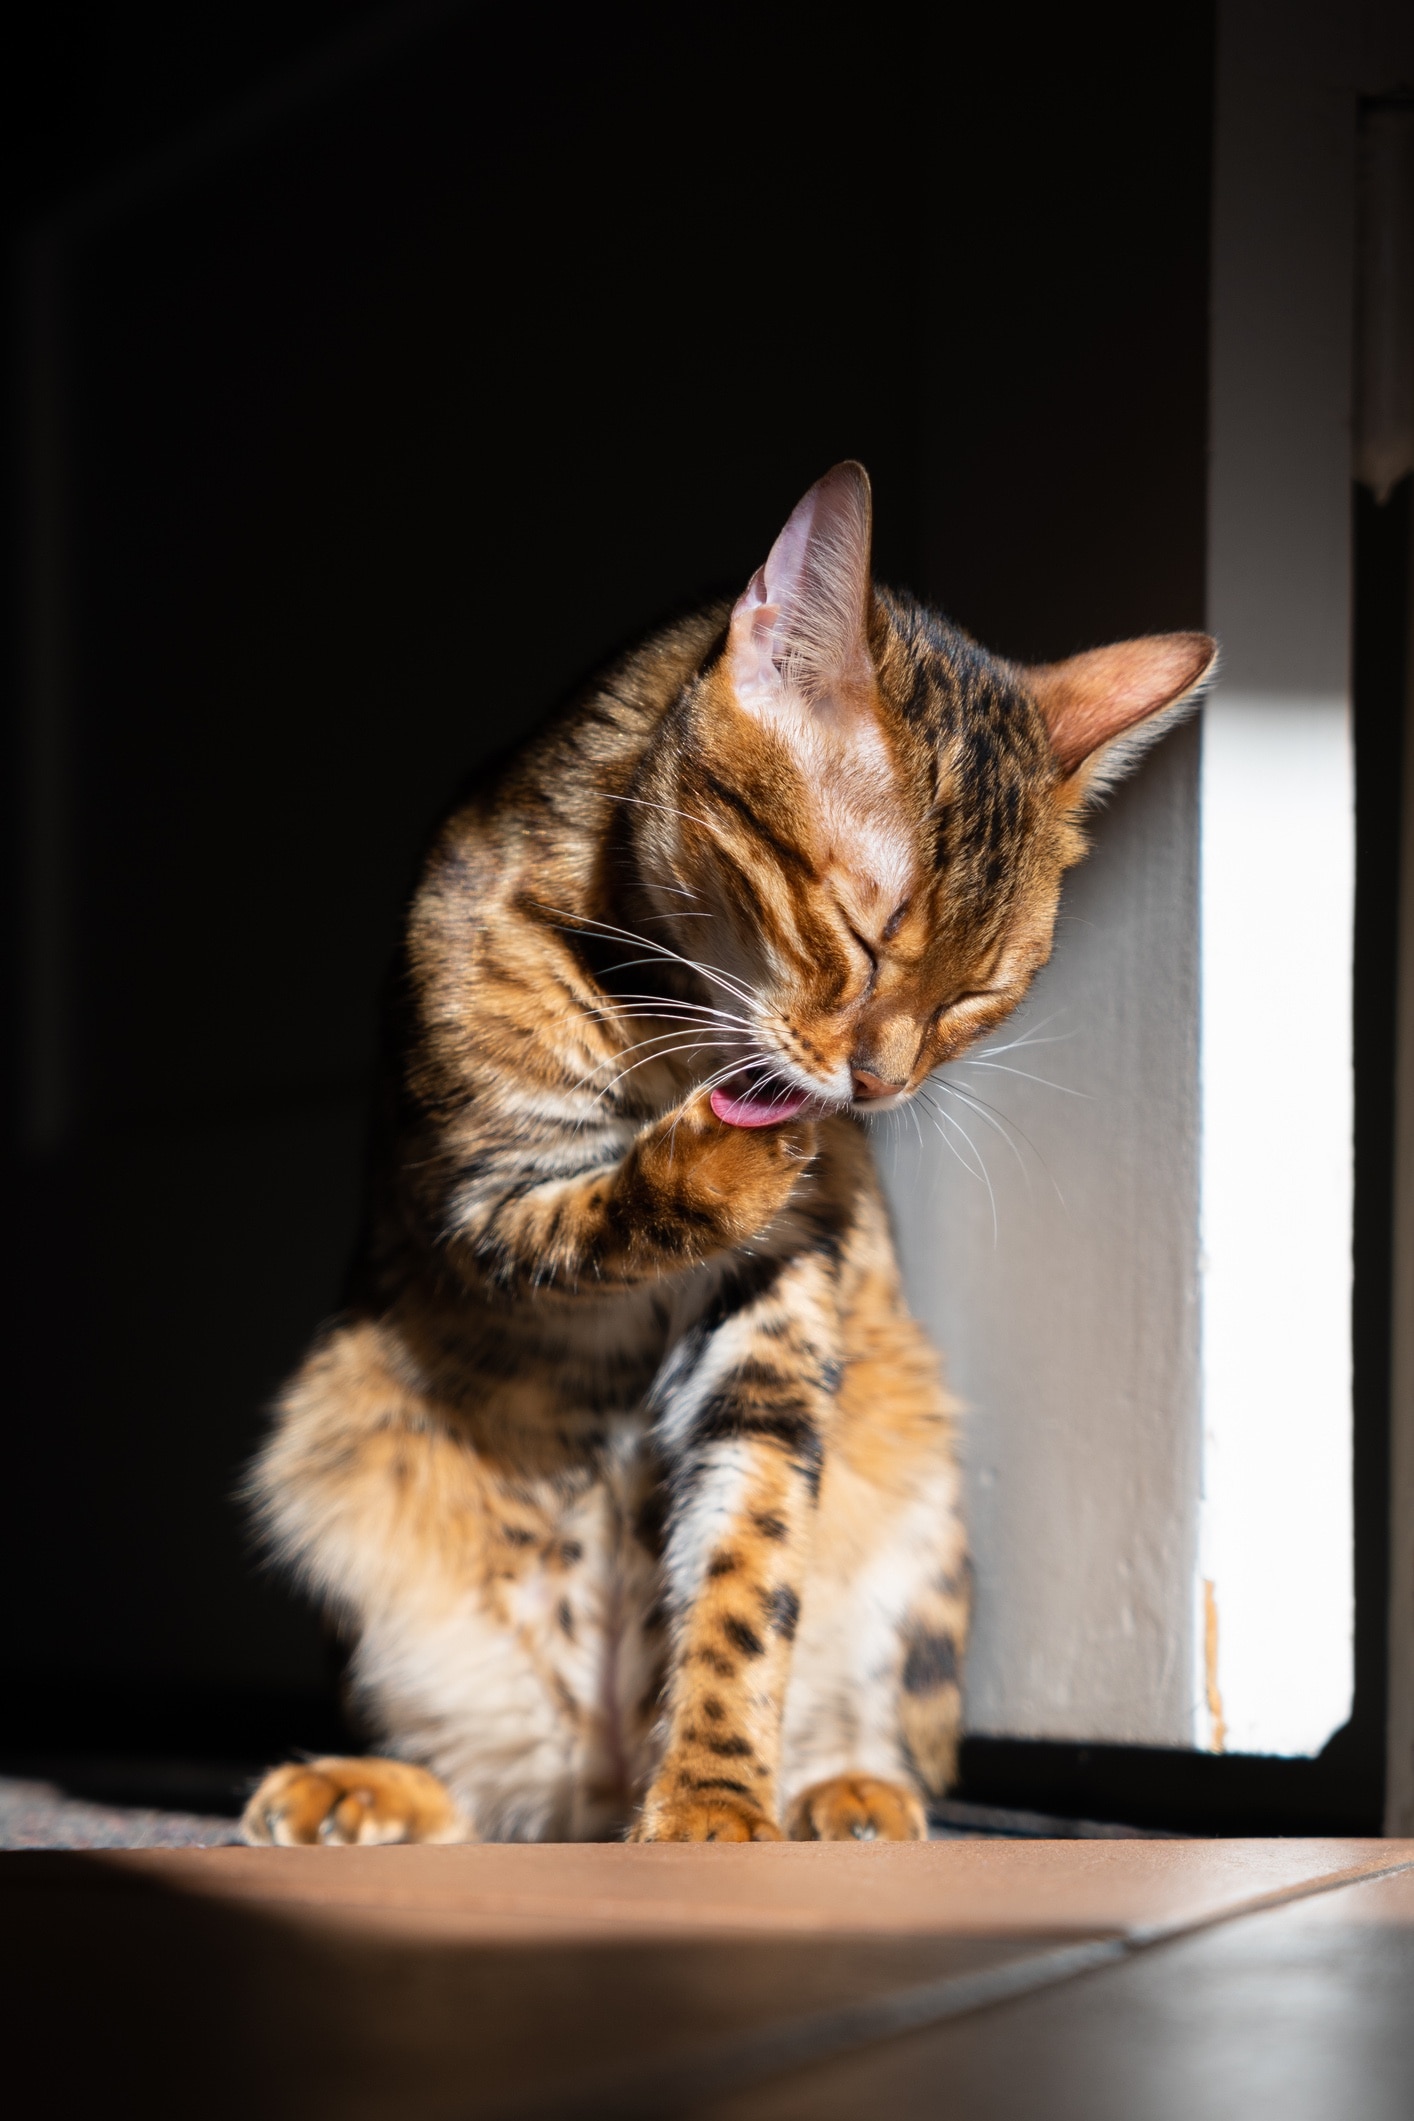 toyger licking his paws while sitting in a sun spot